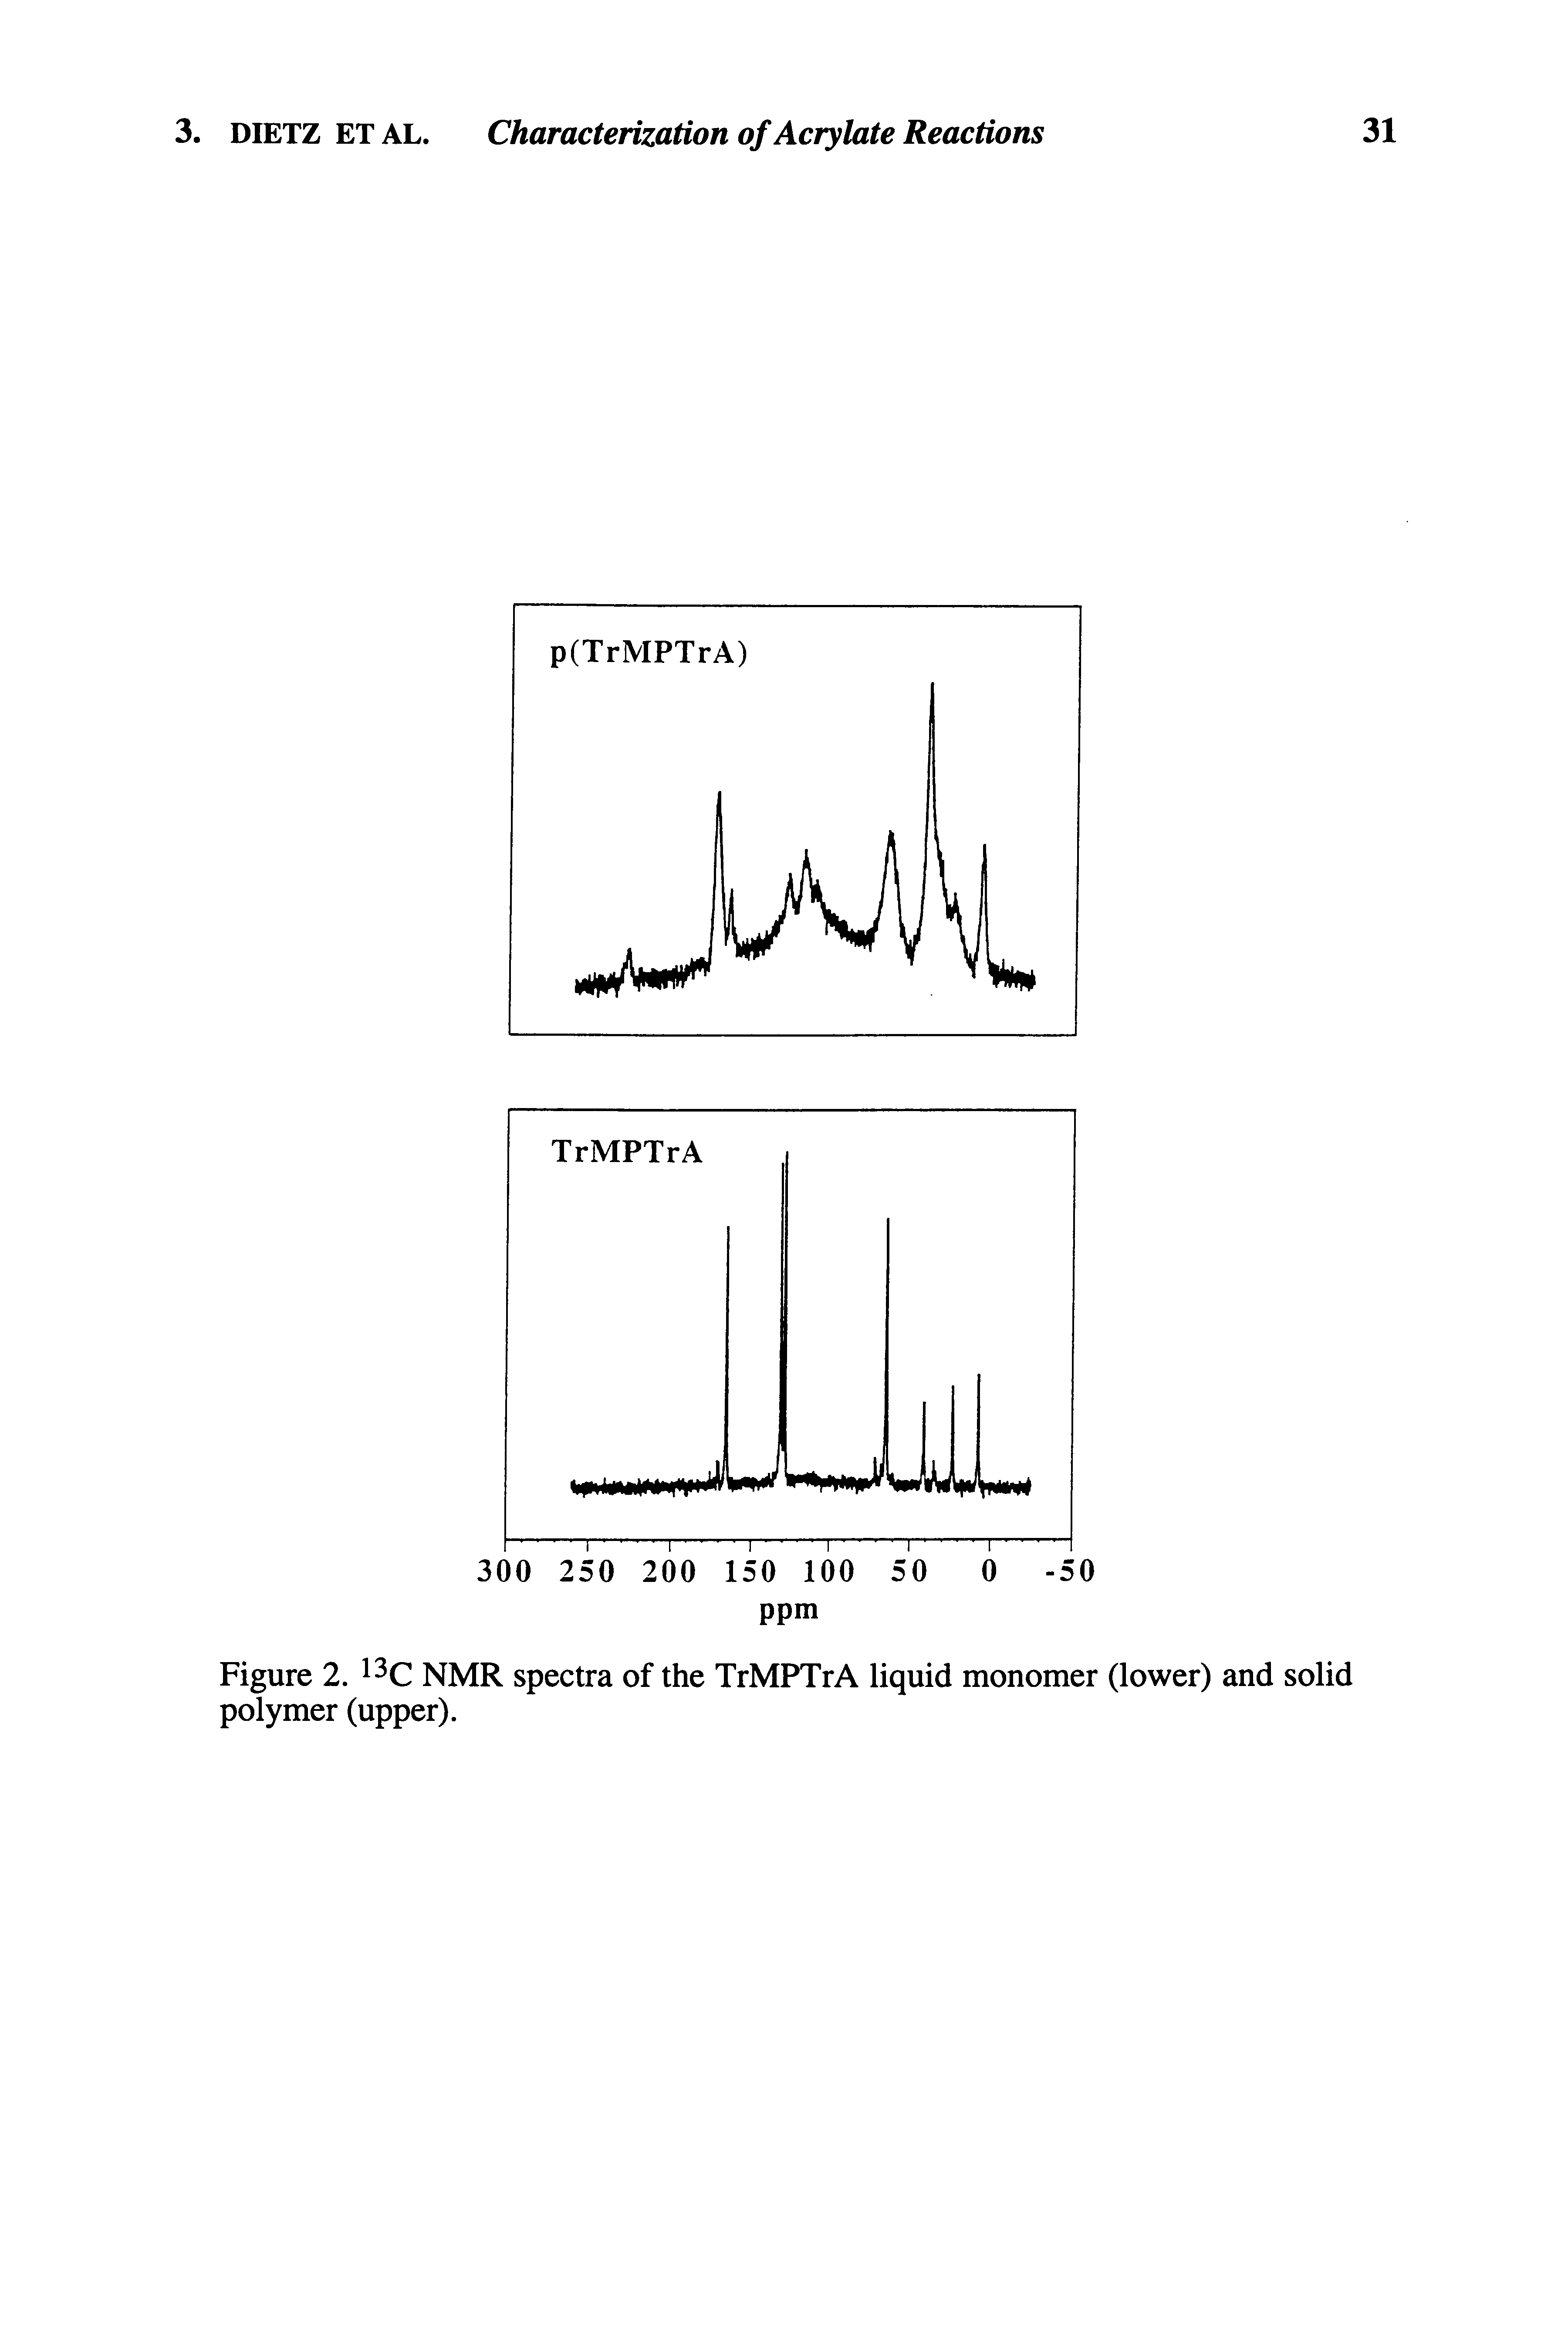 Figure 2. 13C NMR spectra of the TrMPTrA liquid monomer (lower) and solid polymer (upper).